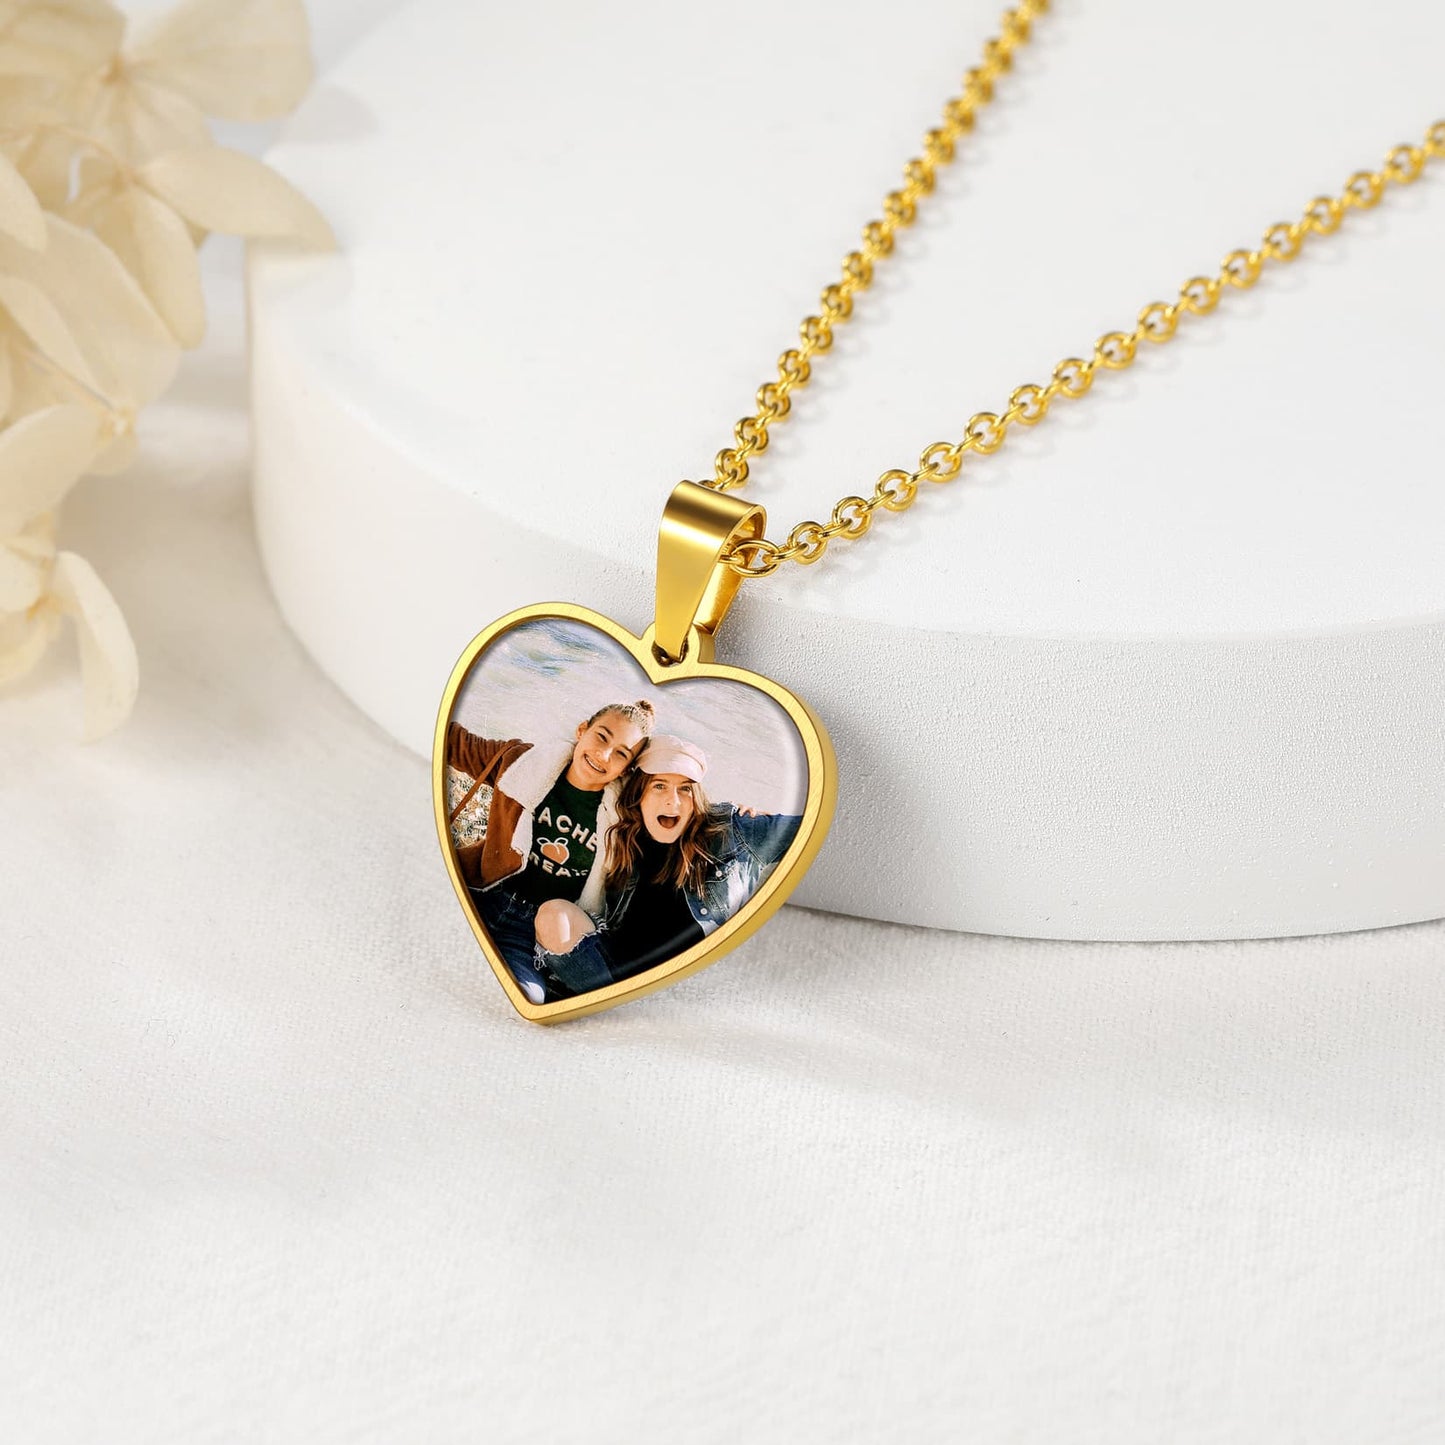 Birthstonesjewelry Double Sided Picture Necklace Gold